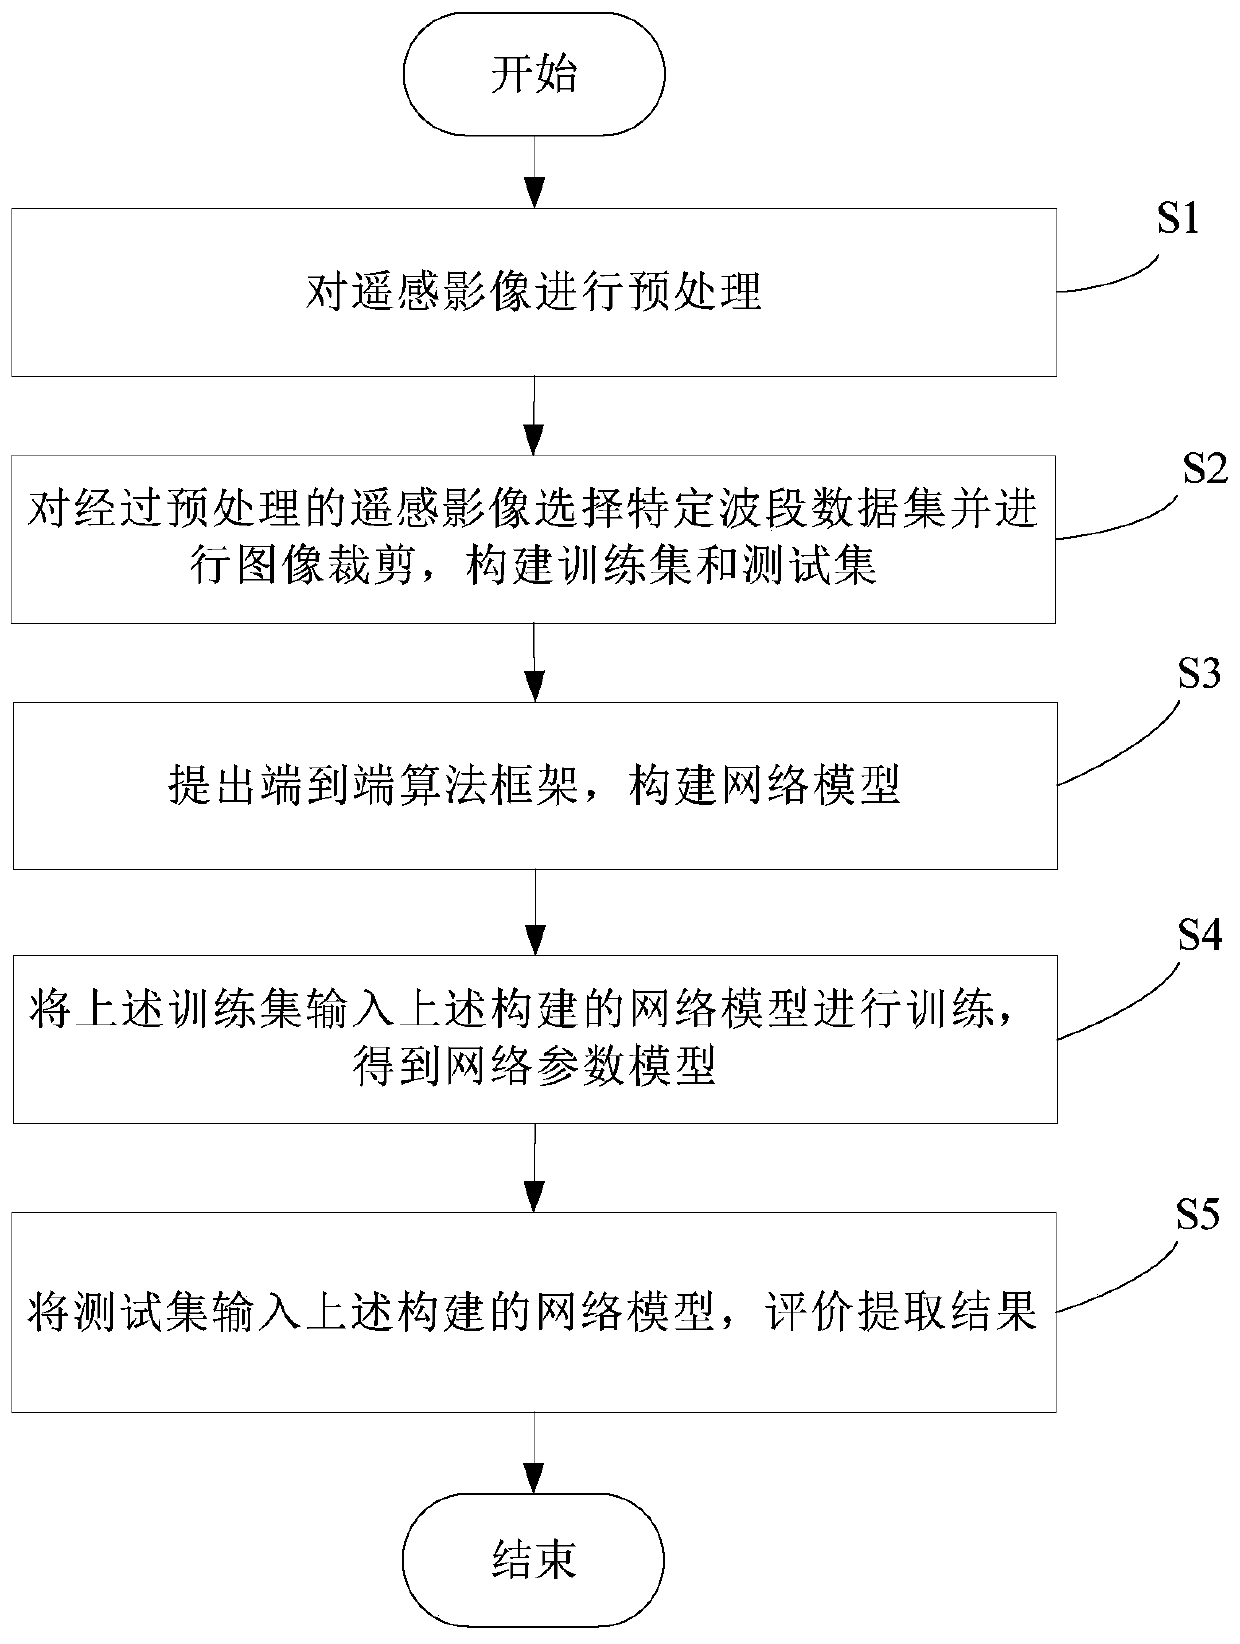 Remote sensing image ground object classification method and system